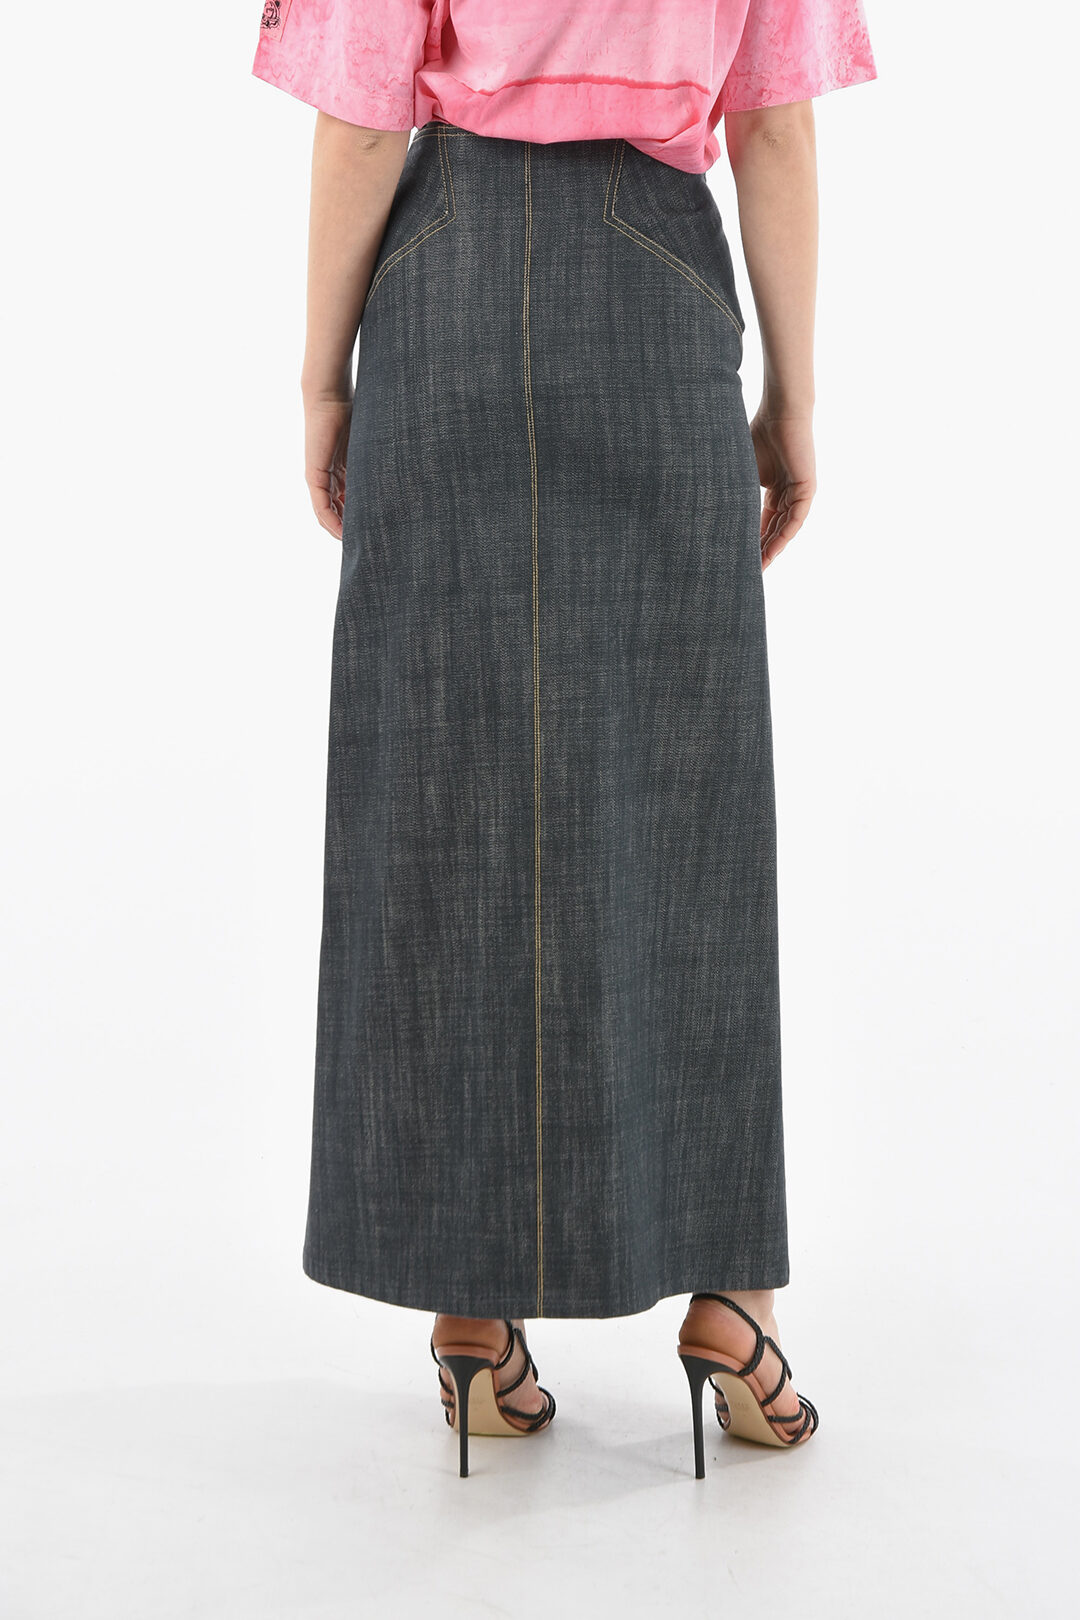 Alaia Long Denim Skirt with Lace Up Corset Detail women - Glamood